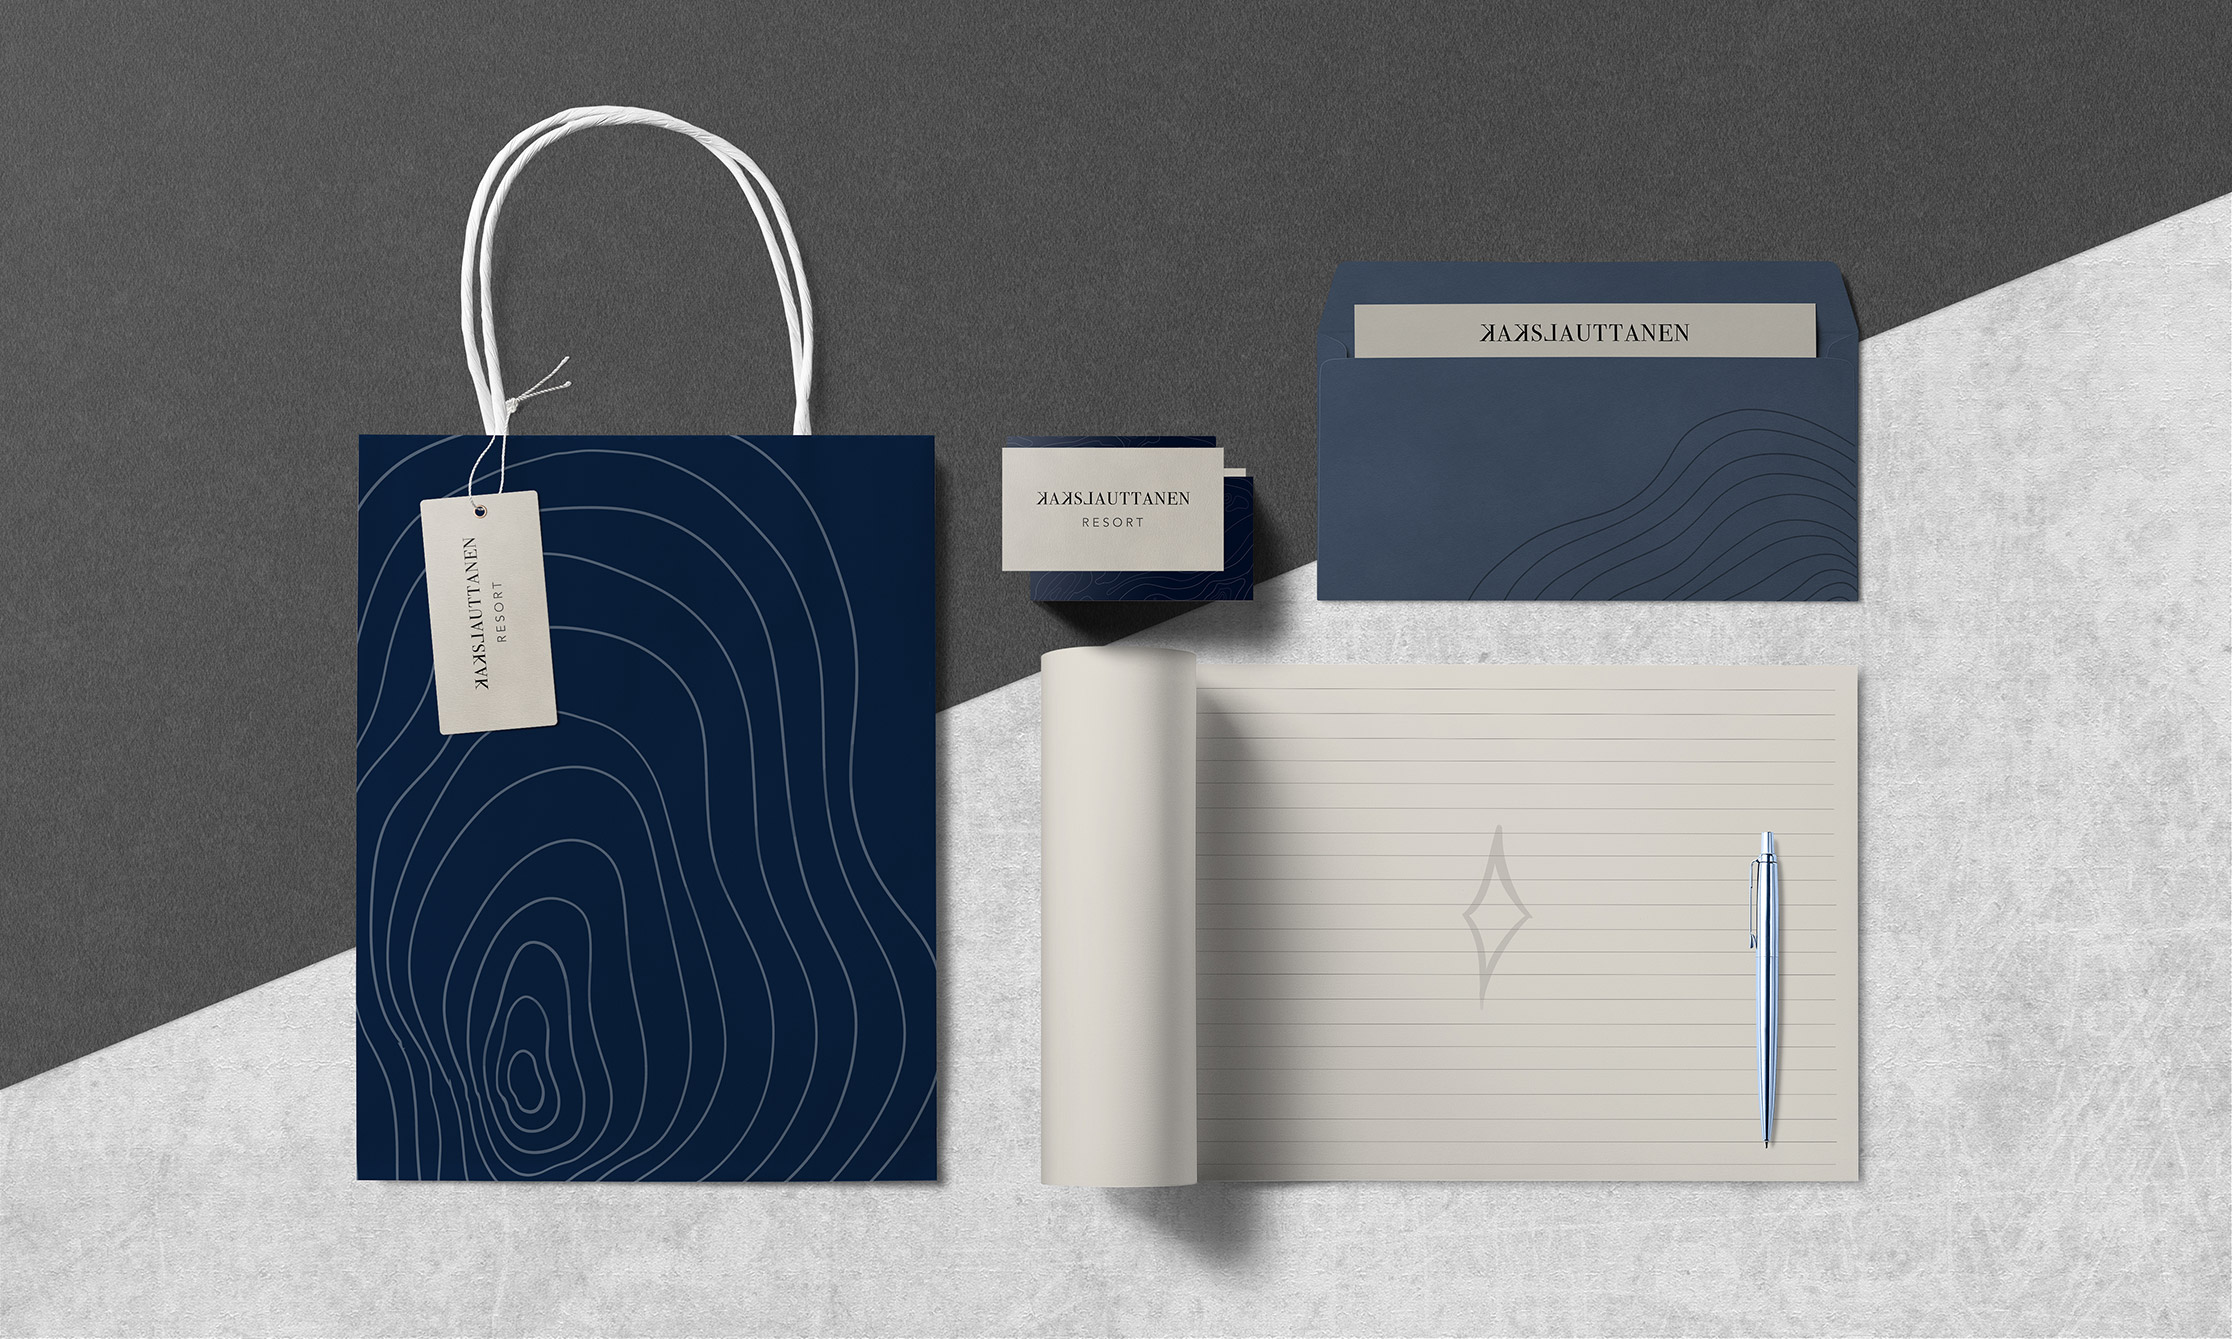 Mock-up visual identity applied to a variety of stationary items